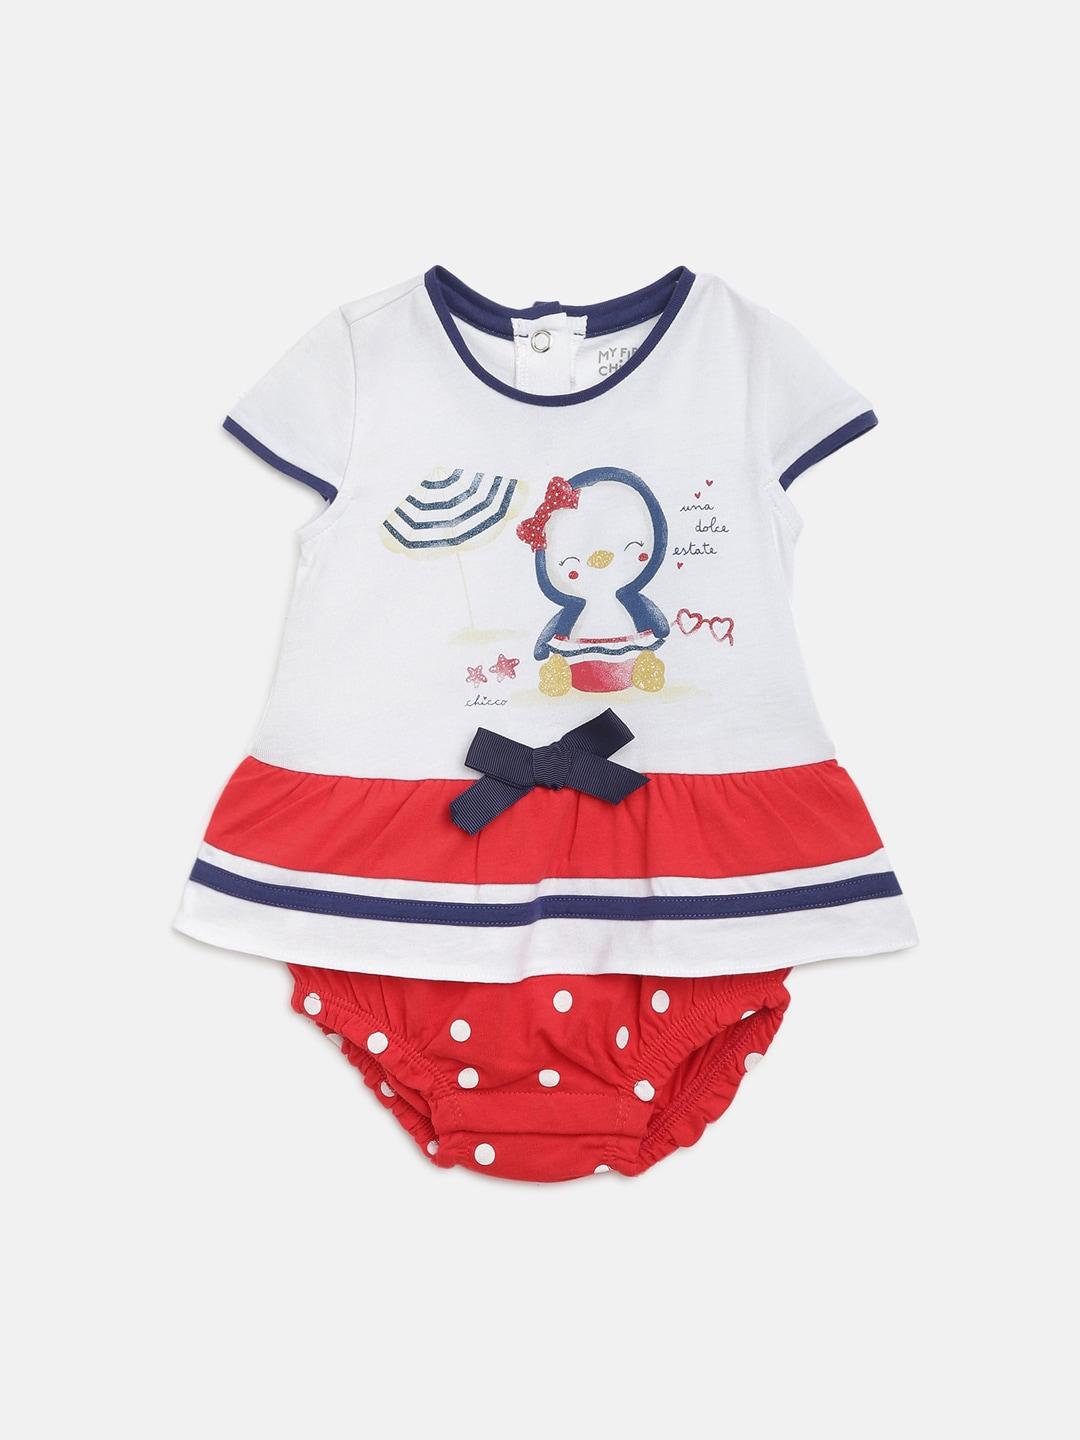 Chicco Infant Girls White & Red Printed Romper